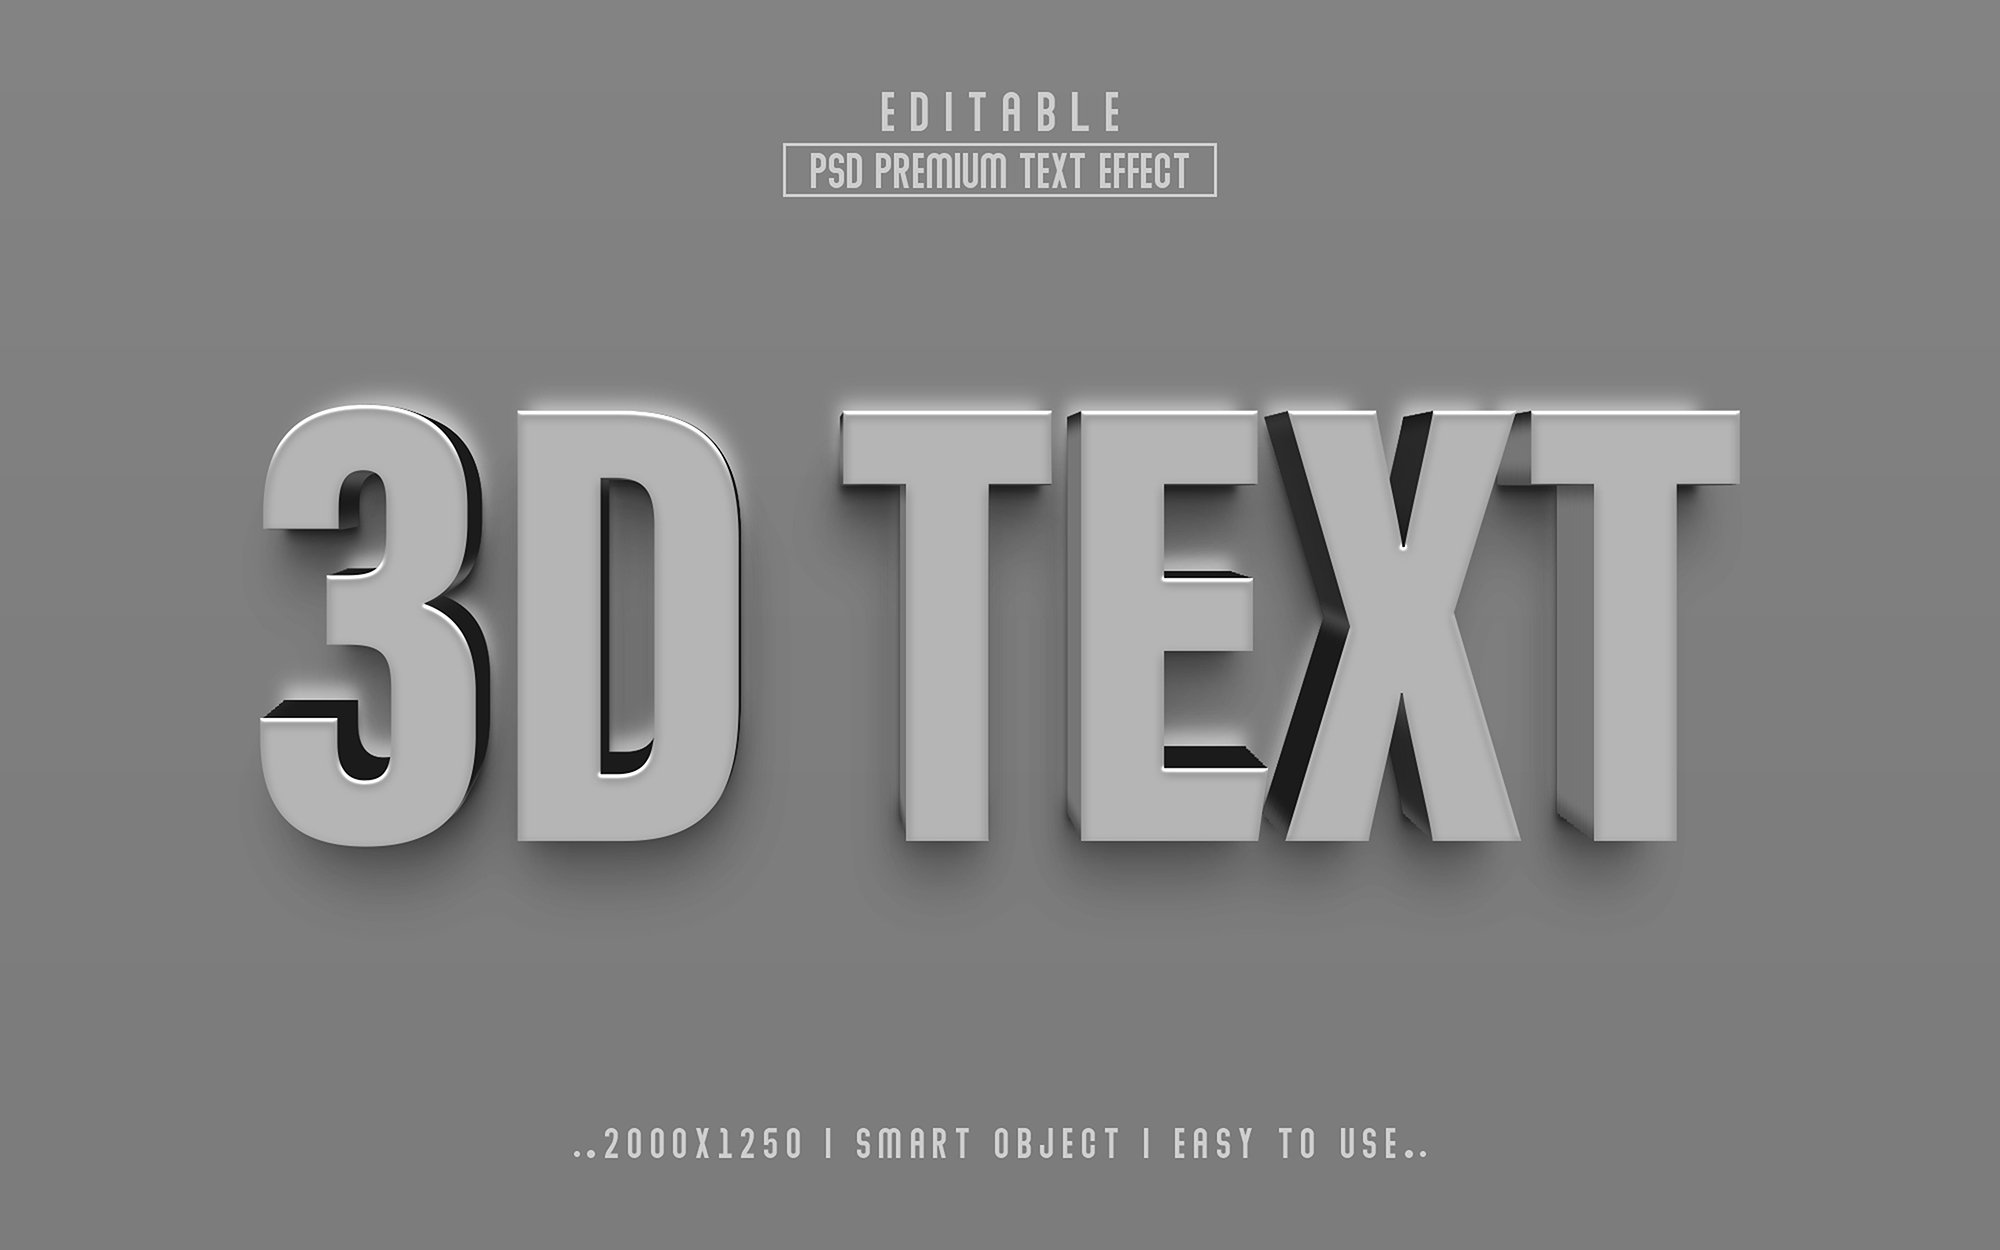 3D Text  Effect Style Templatecover image.